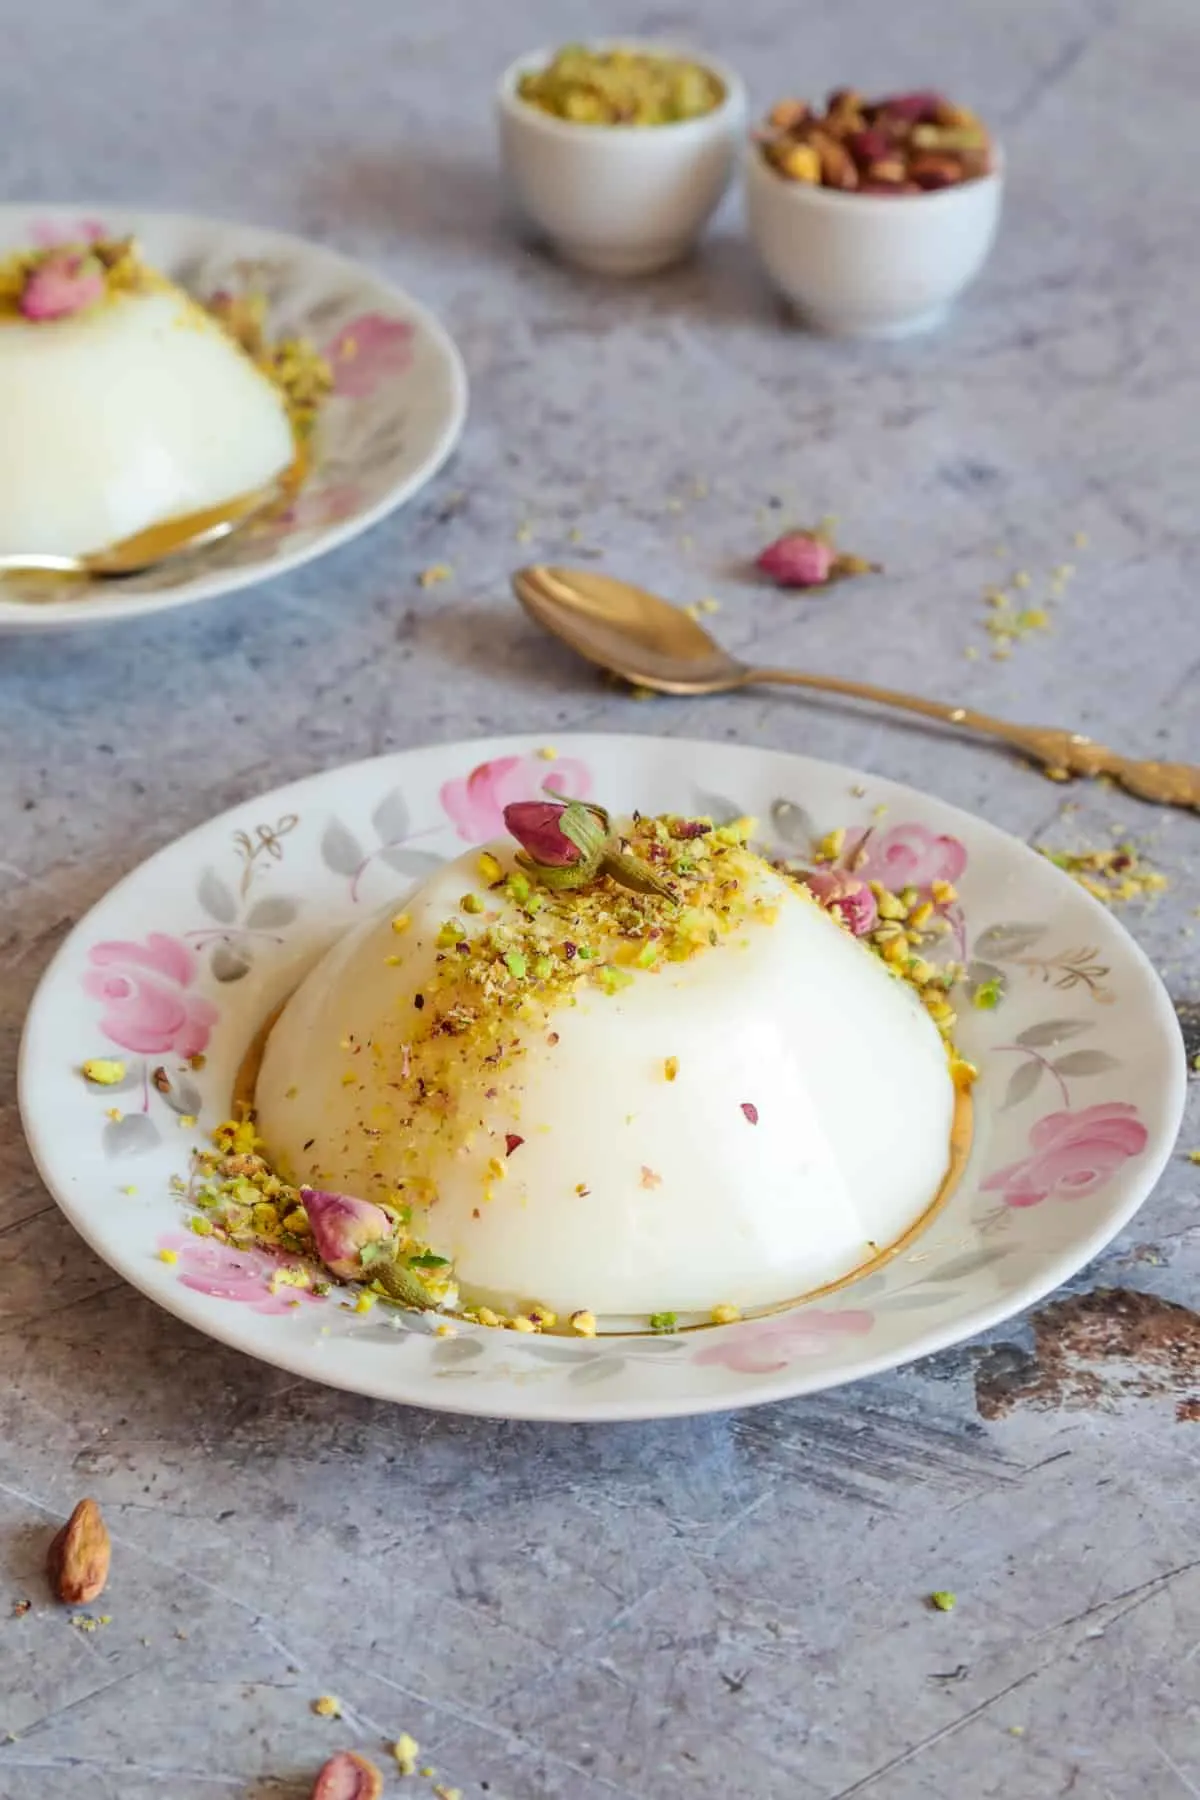 Muhalabieh is a milk pudding that's infused with rosewater and topped with crushed pistachios.